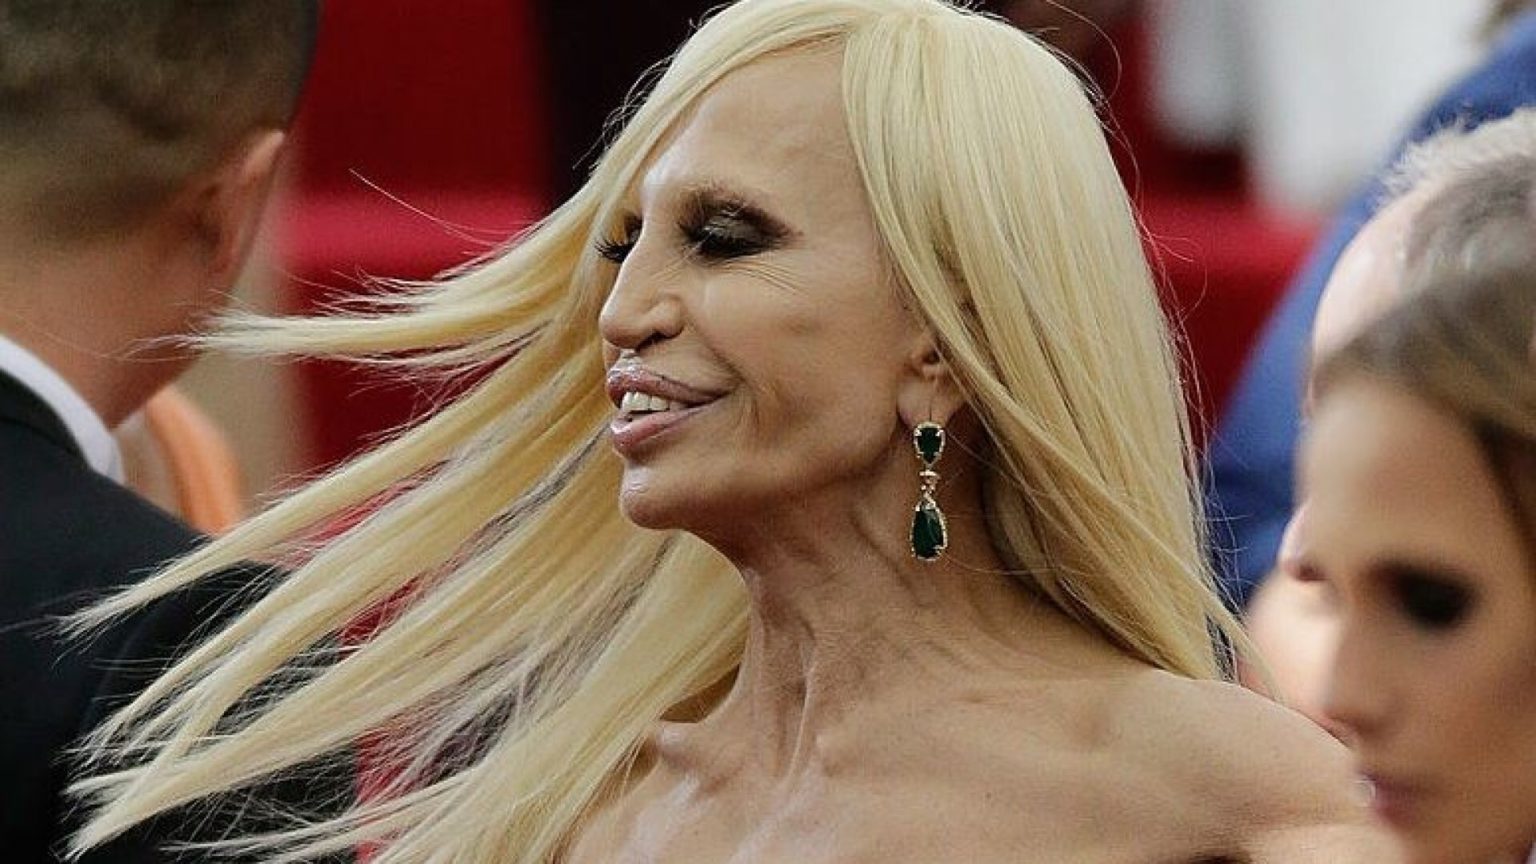 Donatella Versace Turns 65 Soon From Beauty to the Queen of Plastic